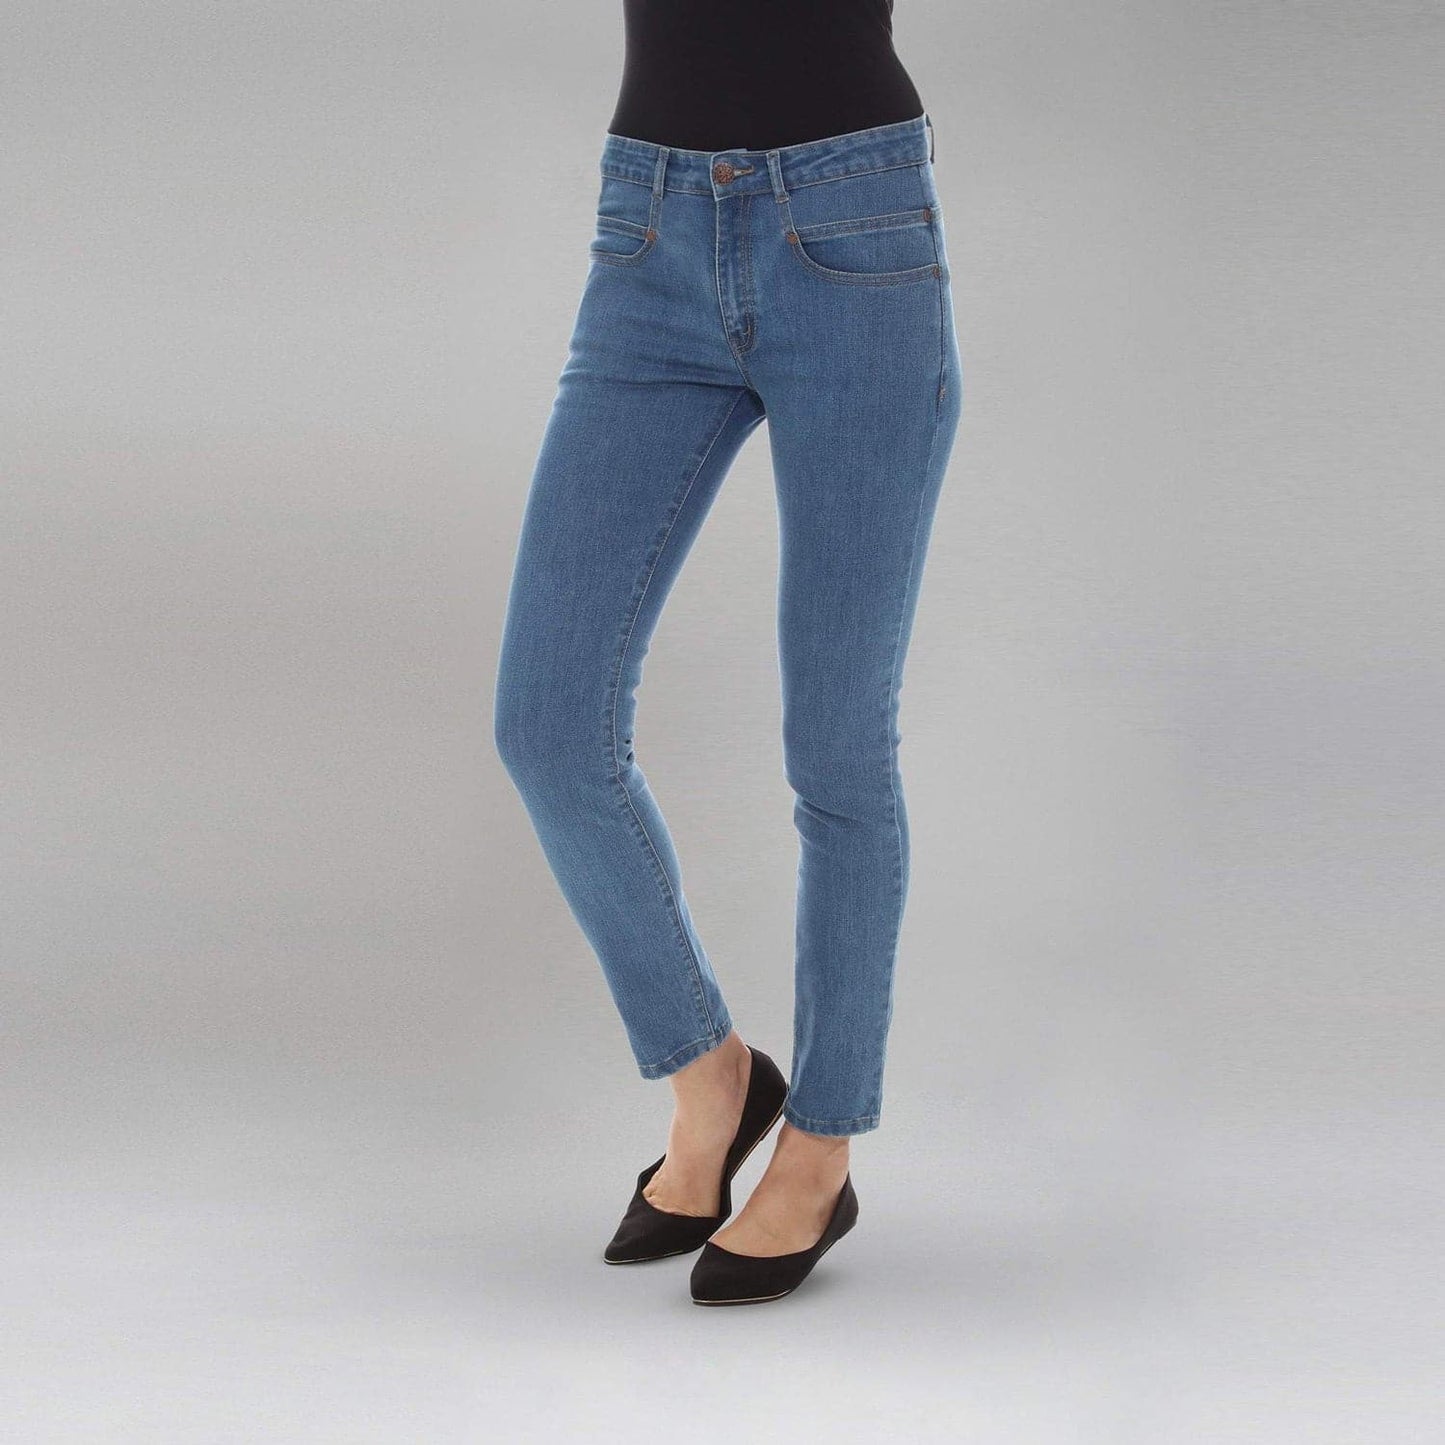 Skinny Premium Jean with COOLMAX® Technology